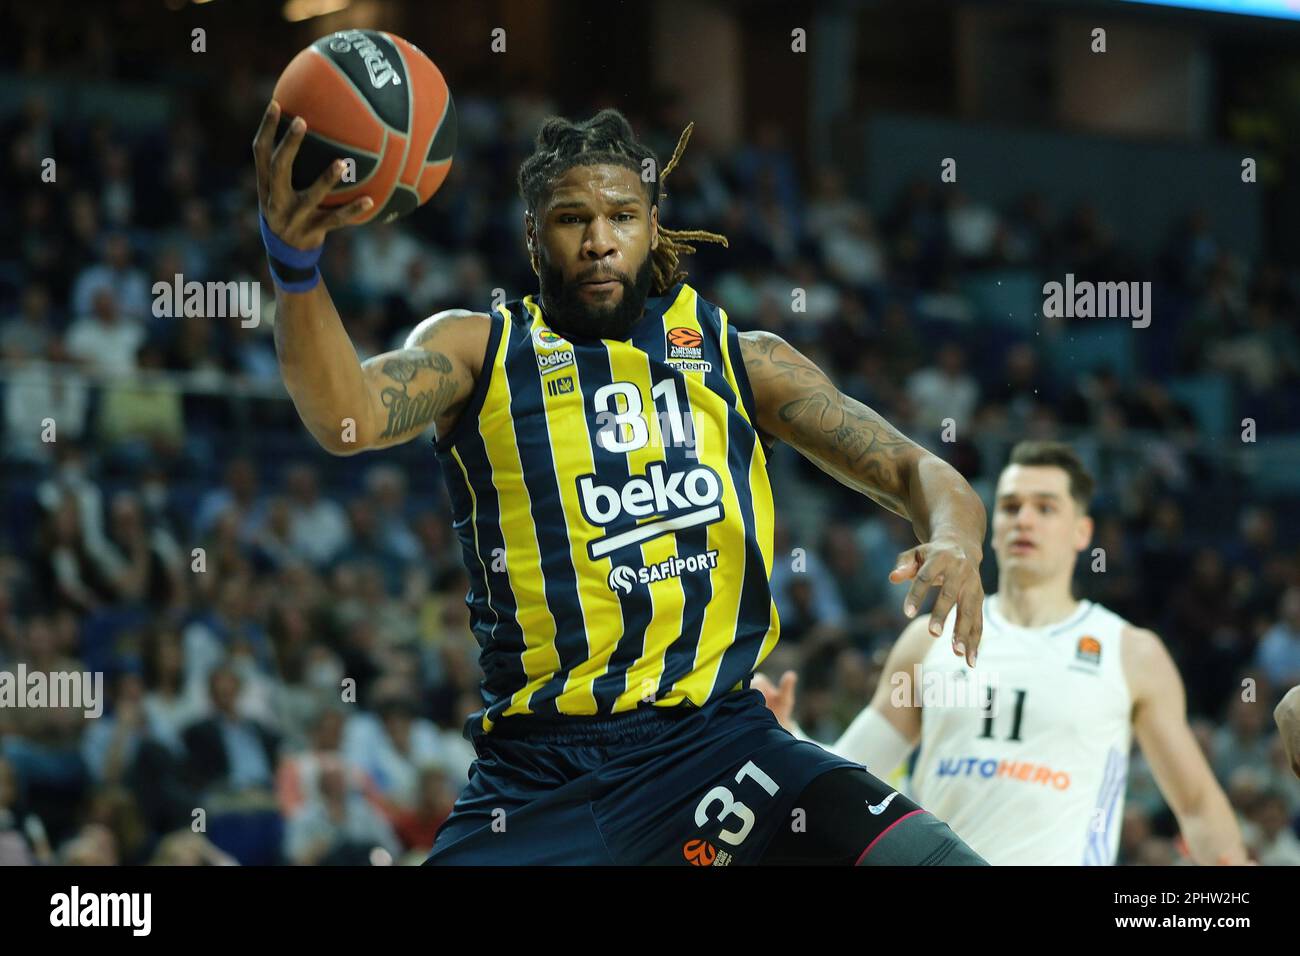 Madrid, Spain. 29th Mar, 2023. Devin Booker of Fenerbahce in action during the Turkish Airlines EuroLeague basketball match between Real Madrid and Fenerbahce at Wizink Center